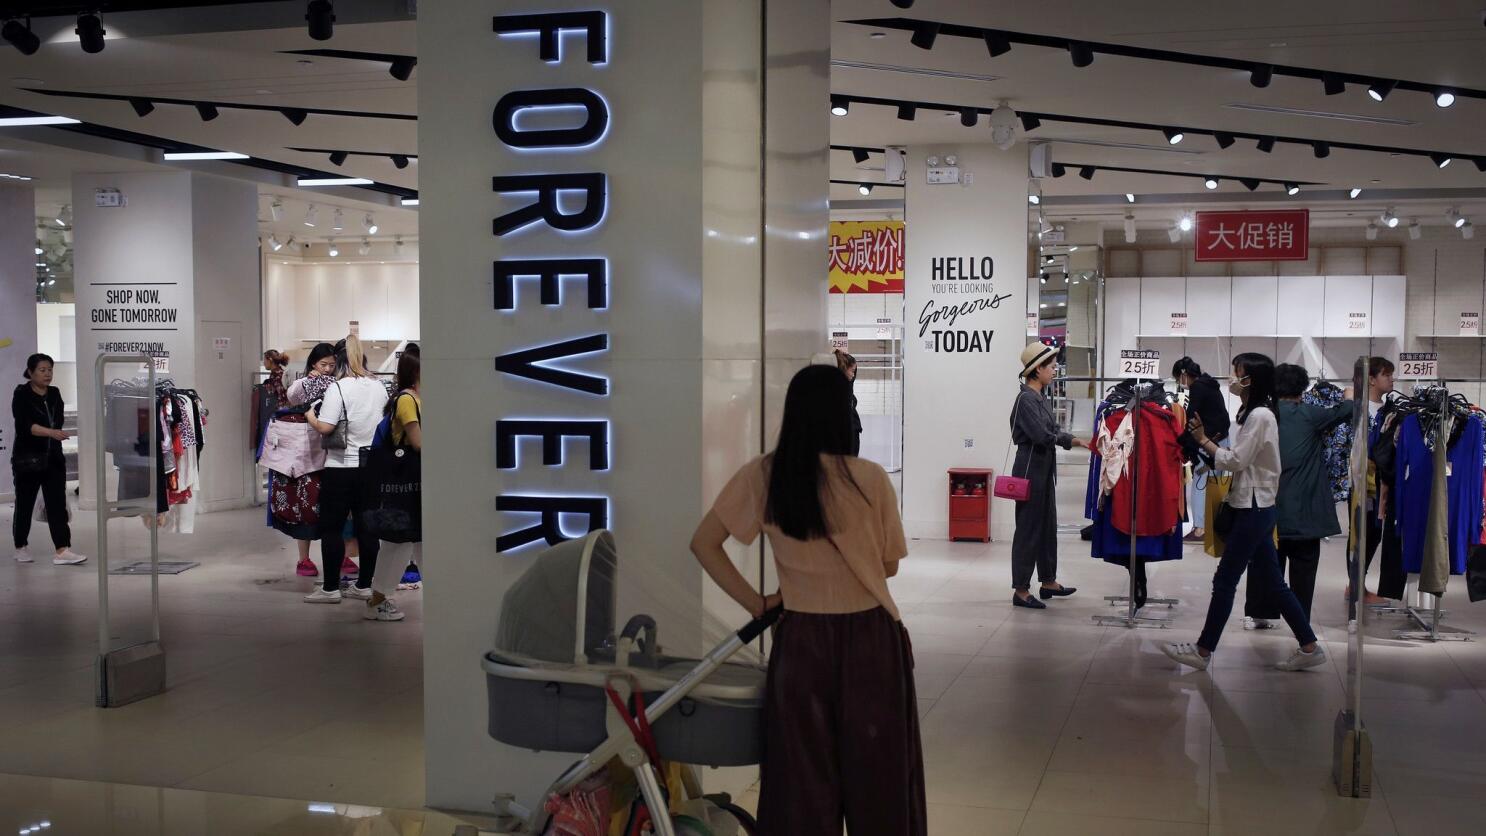 Forever 21 Opens 1st Store of 2021 Since COVID & More Brand Changes -  Yonkers Tribune.